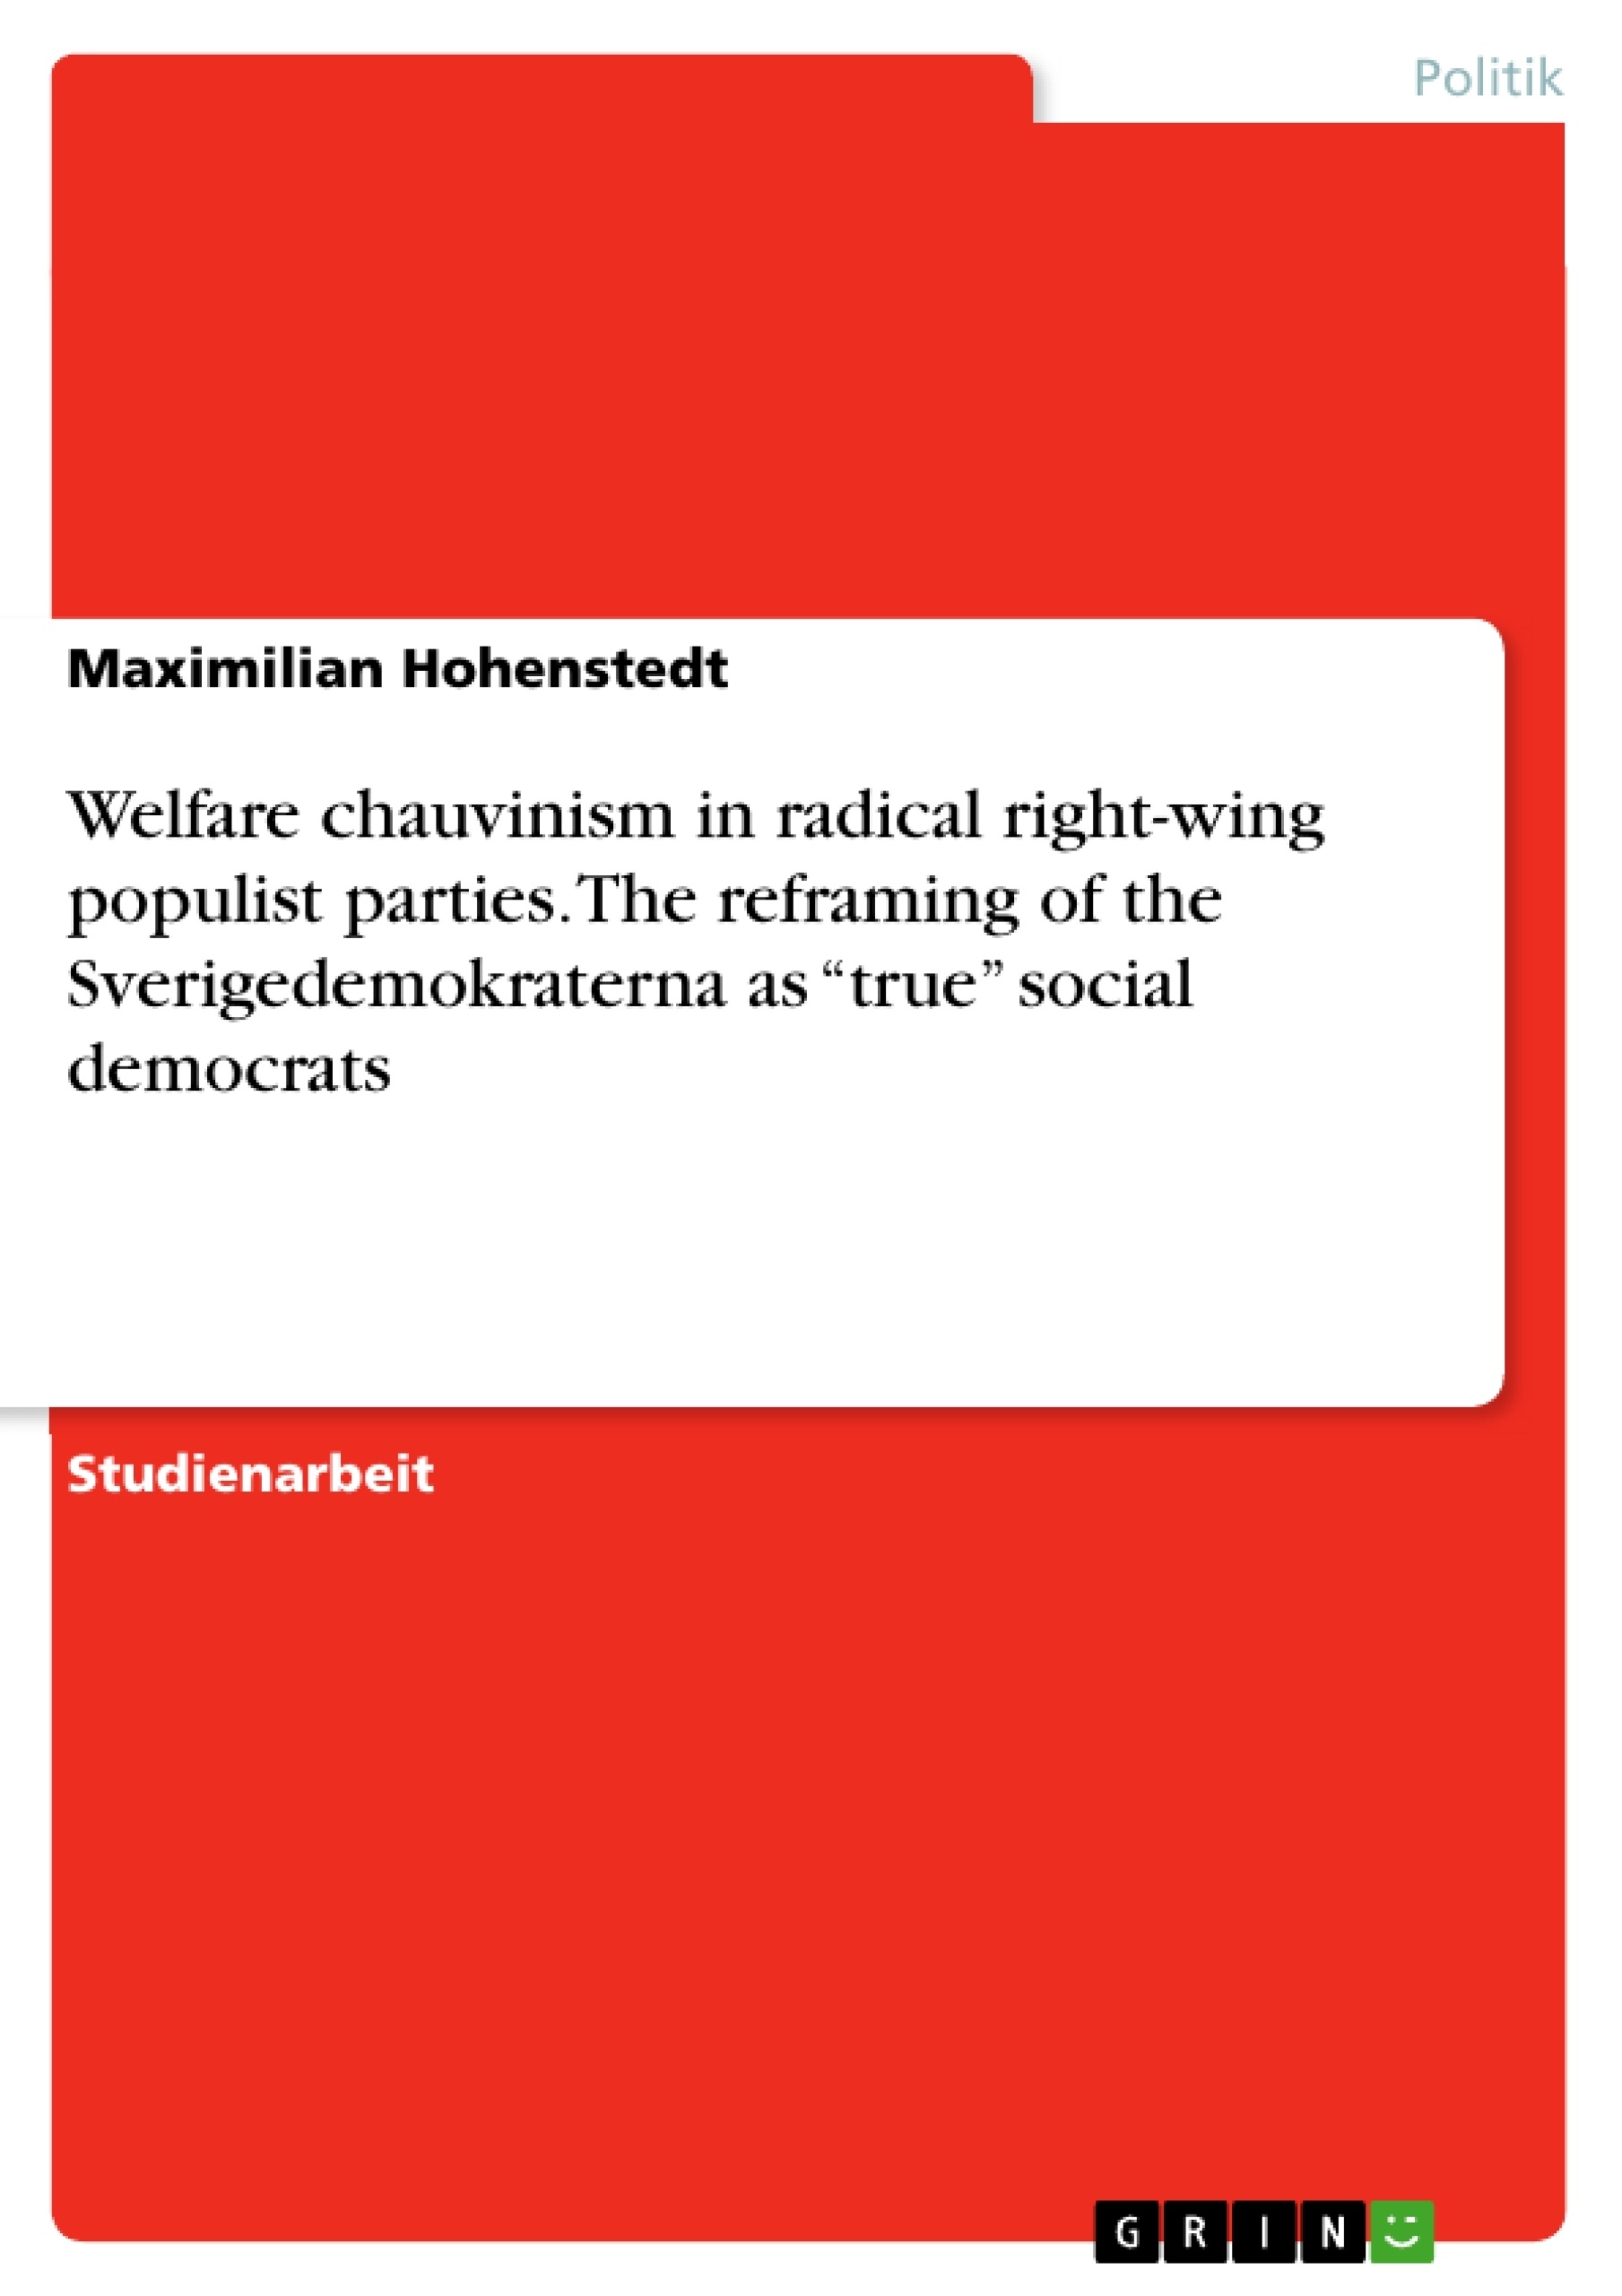 Titel: Welfare chauvinism in radical right-wing populist parties. The reframing of the Sverigedemokraterna as “true” social democrats